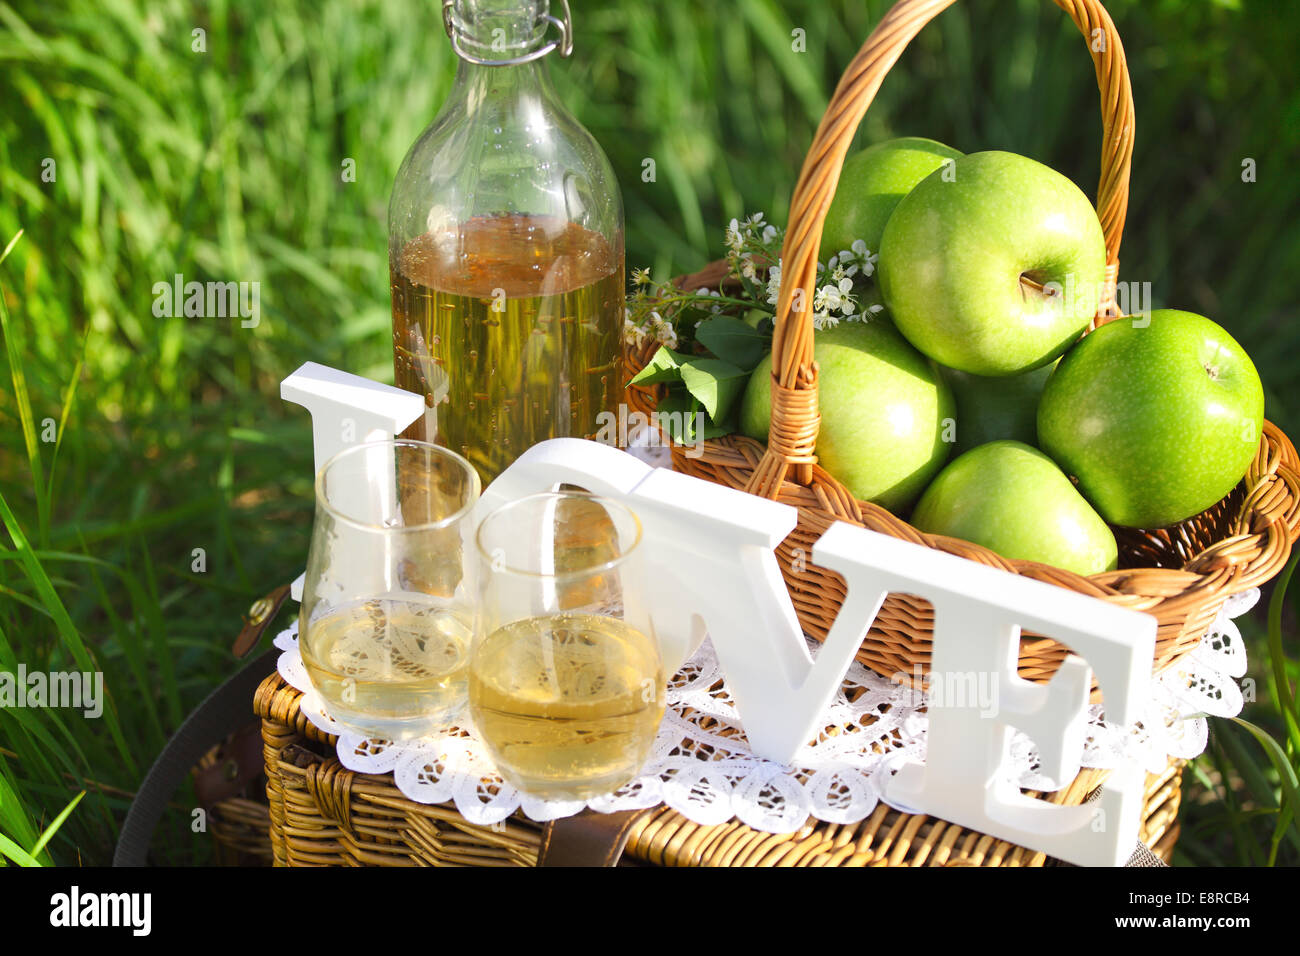 Apple drink and basket with green apples outdoors Stock Photo